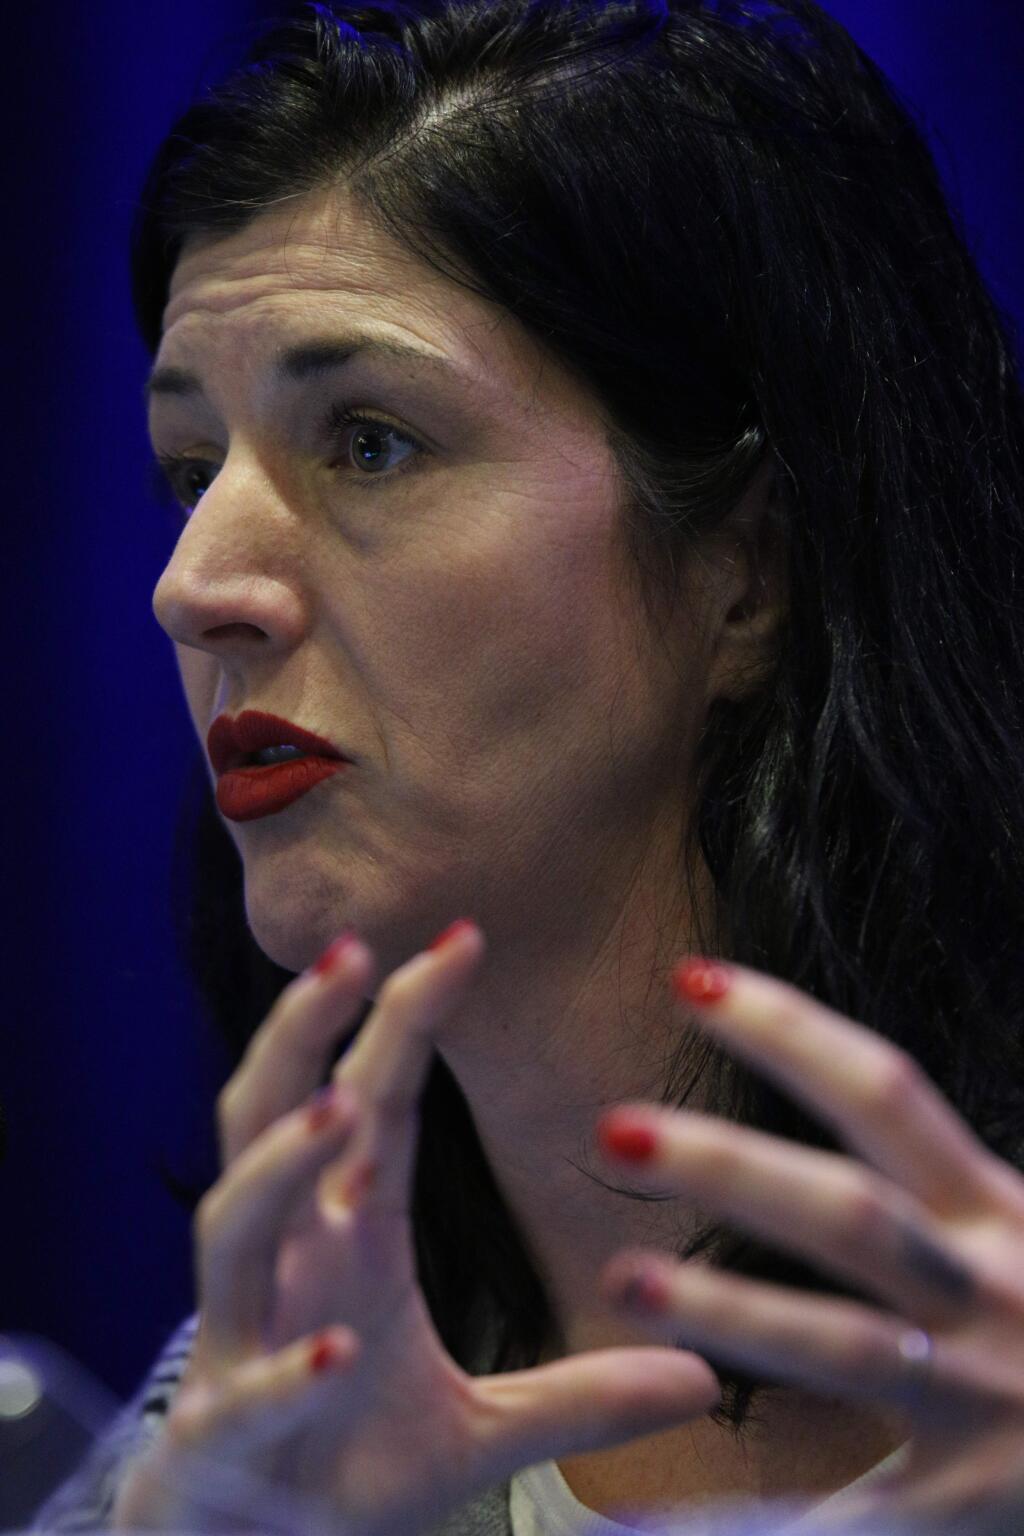 Serafina Palandech, president and co-founder of Hip Chick Farms, talks about how the Sebastopol-based startup is disrupting the market for chicken nuggets, speaking at North Bay Business Journal's Specialty Food & Beverage Industry Conference at Hyatt Regency Sonoma Wine Country hotel in Santa Rosa on Thursday, Feb. 28, 2019. (JEFF QUACKENBUSH / NORTH BAY BUSINESS JOURNAL)